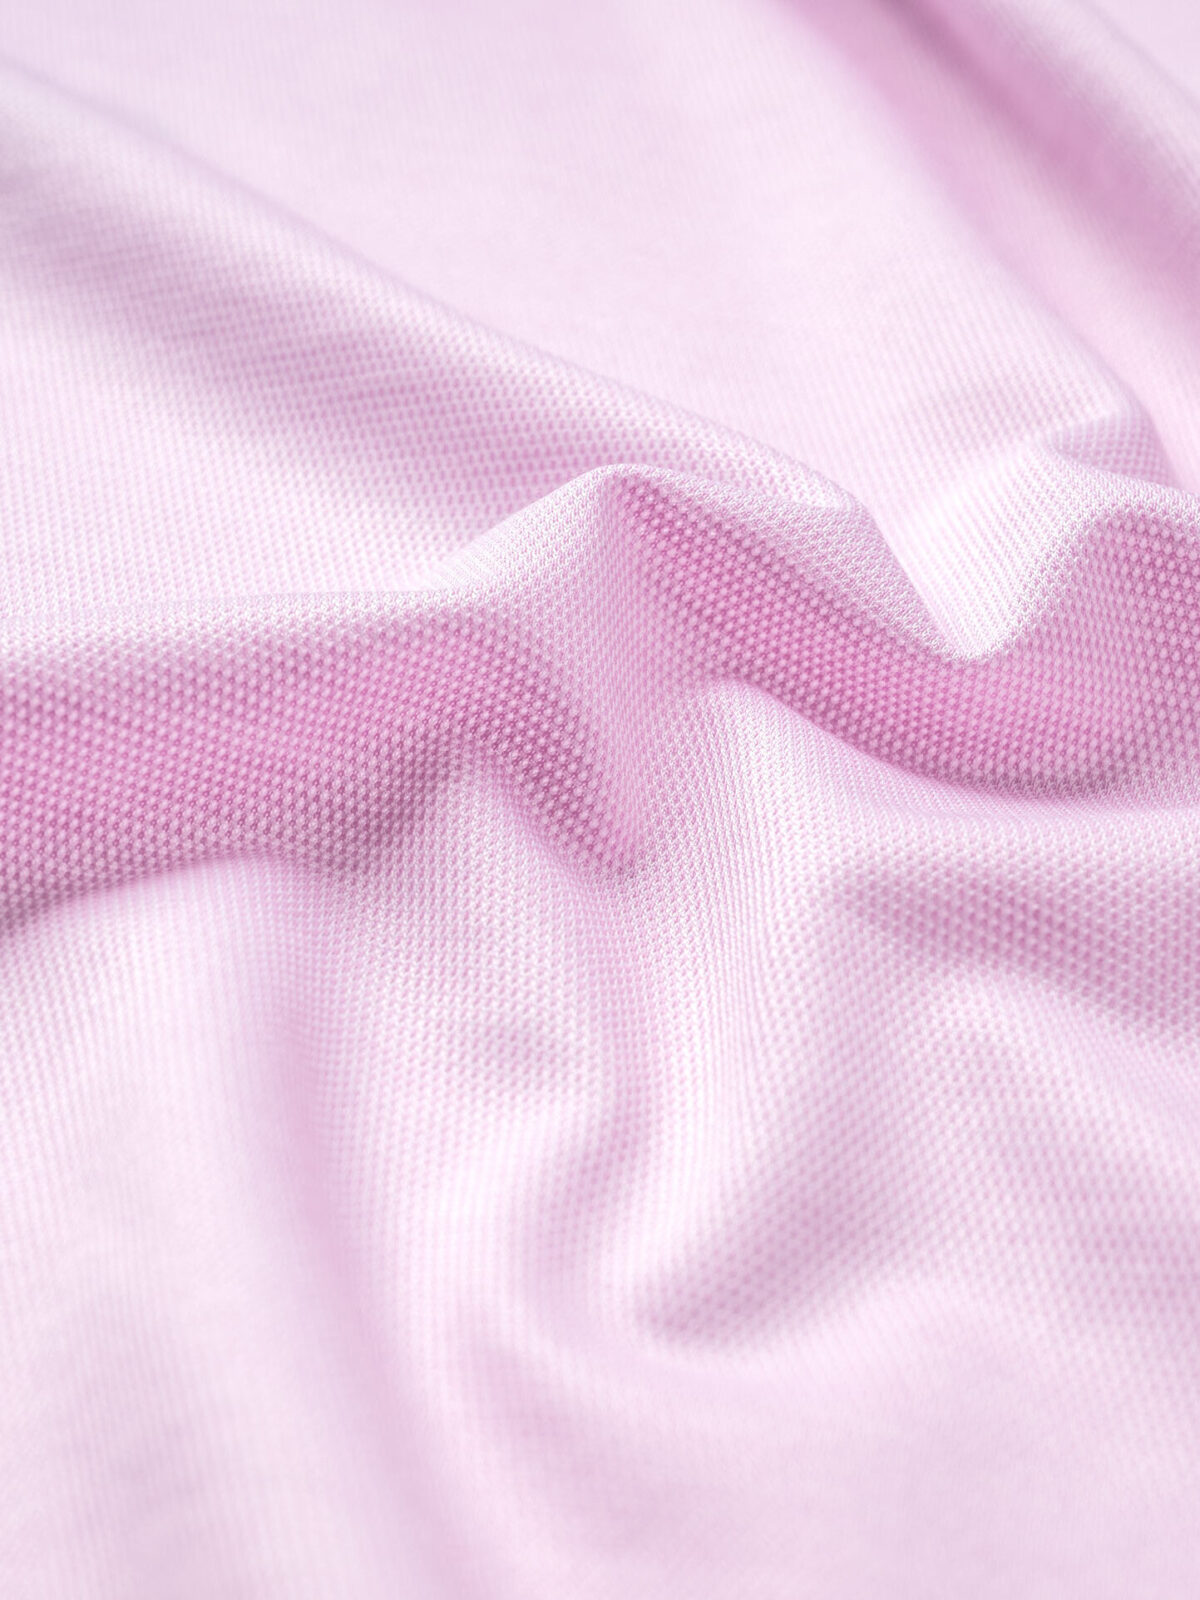 Pink Coolmax Performance Knit Shirts by Proper Cloth